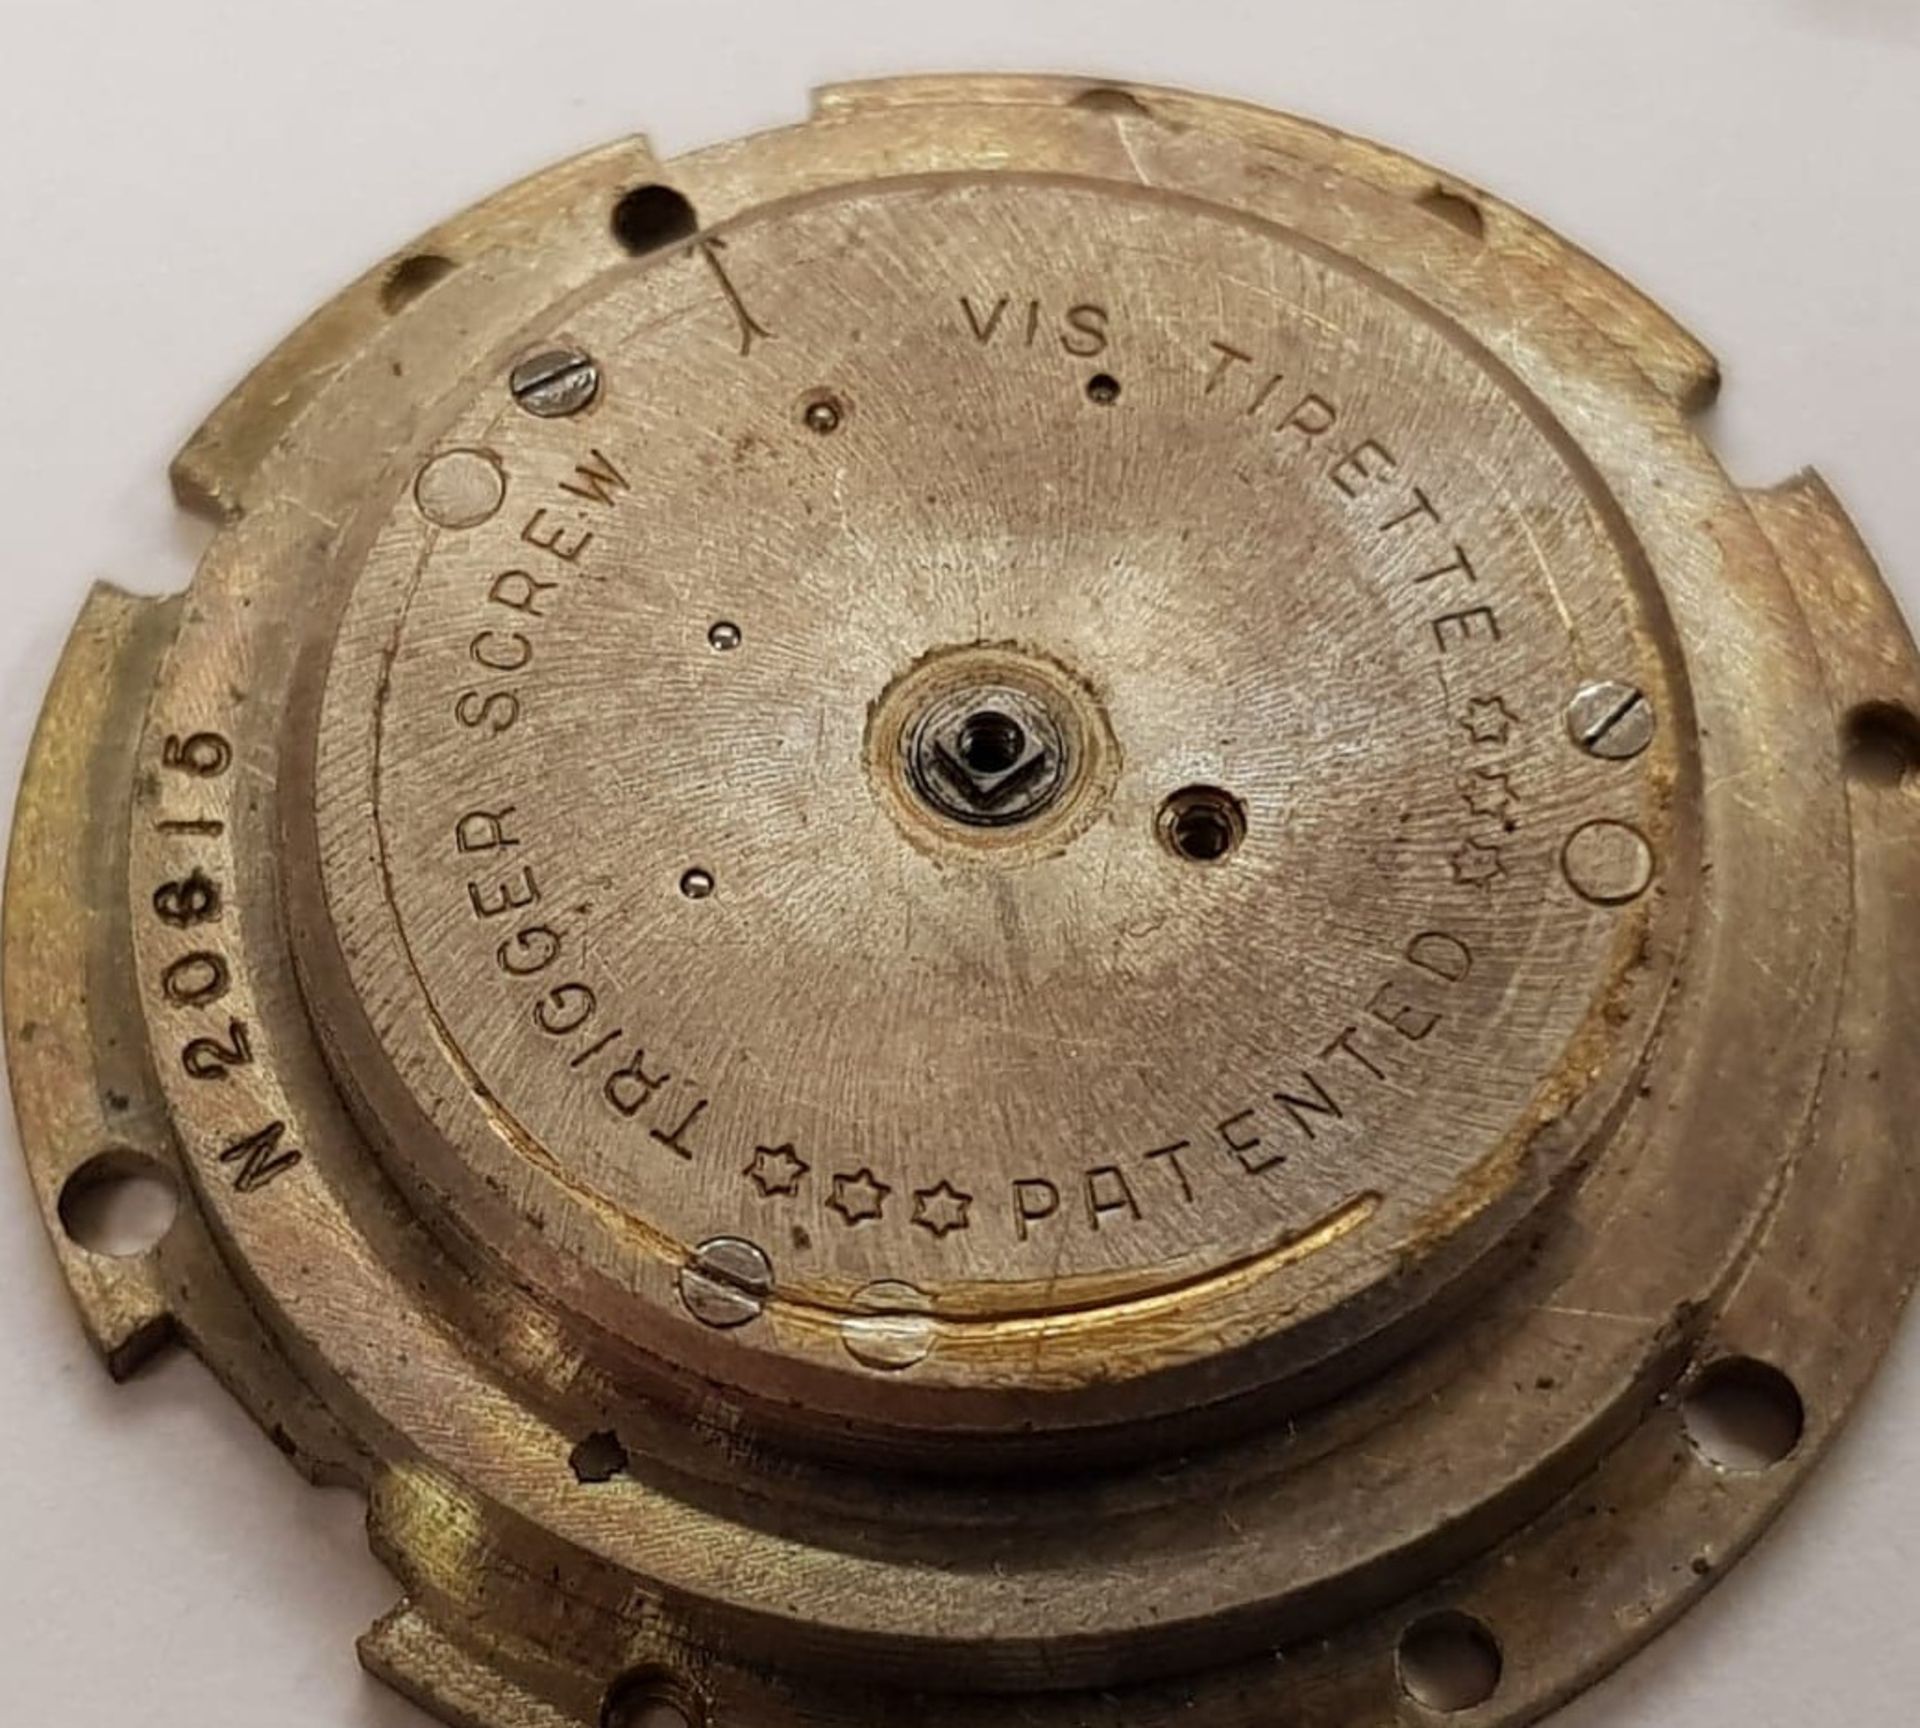 Rolex Oyster Perpetual Certified Chronometer Bubbleback Case Type 5015 For Restoration - Image 11 of 11